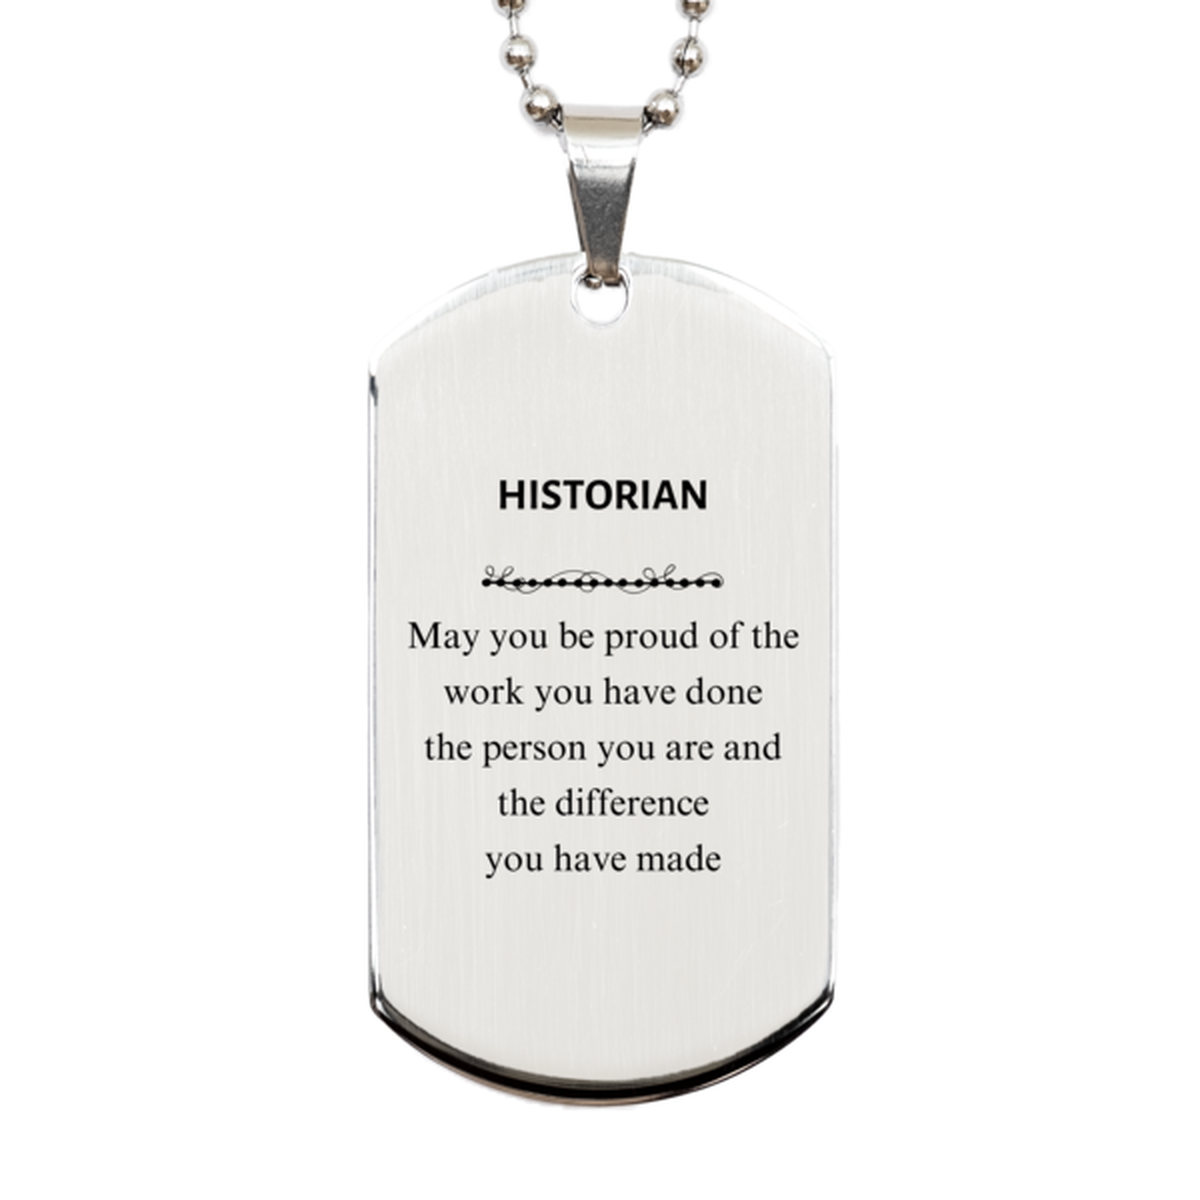 Historian May you be proud of the work you have done, Retirement Historian Silver Dog Tag for Colleague Appreciation Gifts Amazing for Historian